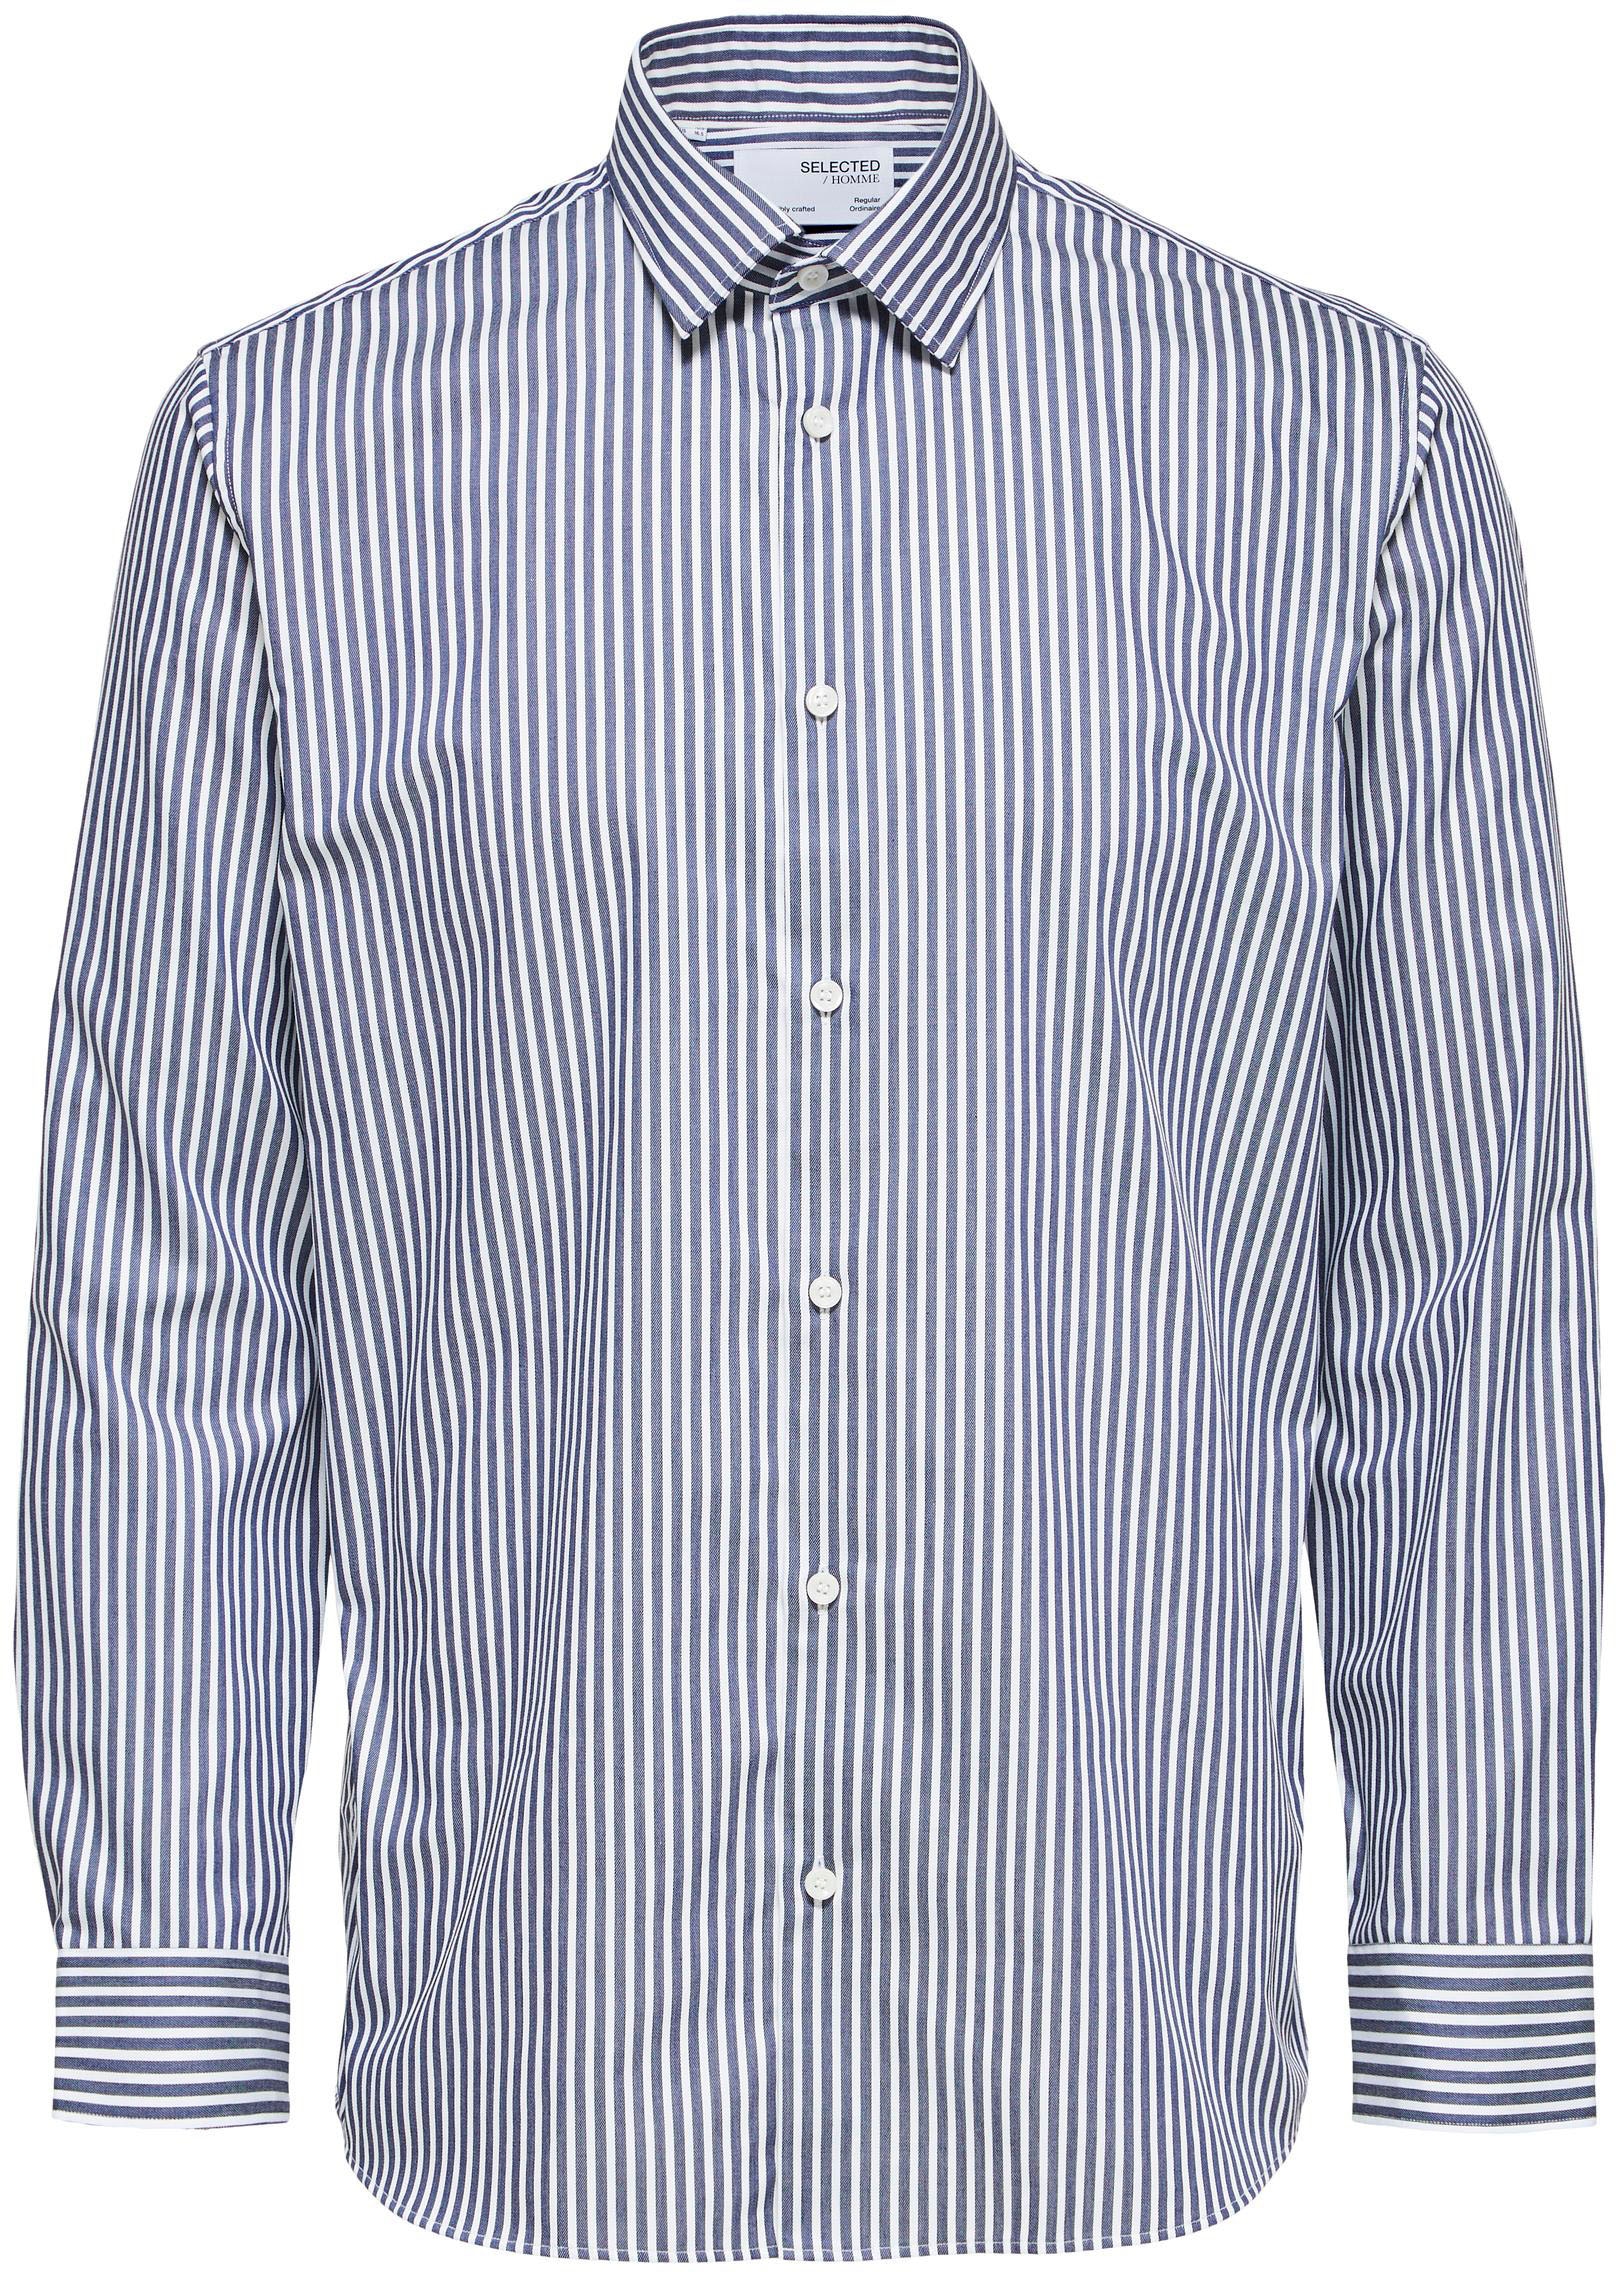 bei SHIRT« kaufen SELECTED HOMME »SLHSLIMETHAN online OTTO Businesshemd